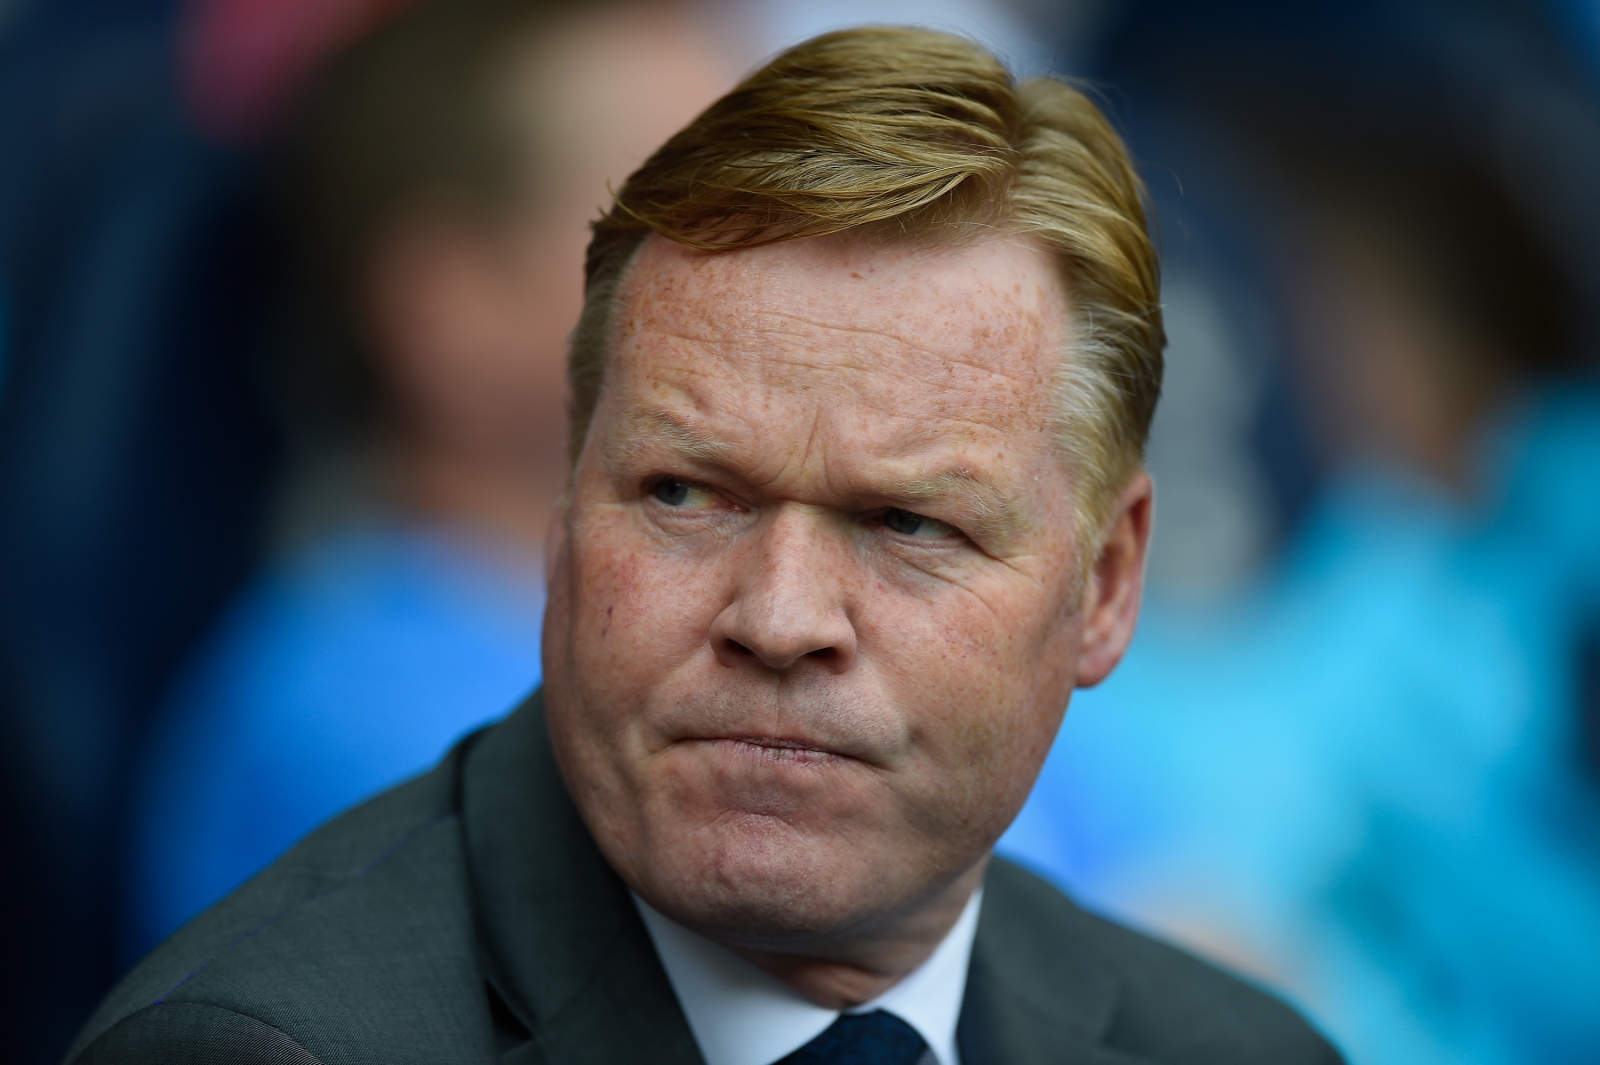 Ronald Koeman to Everton: Dutchman named new manager on three-year deal